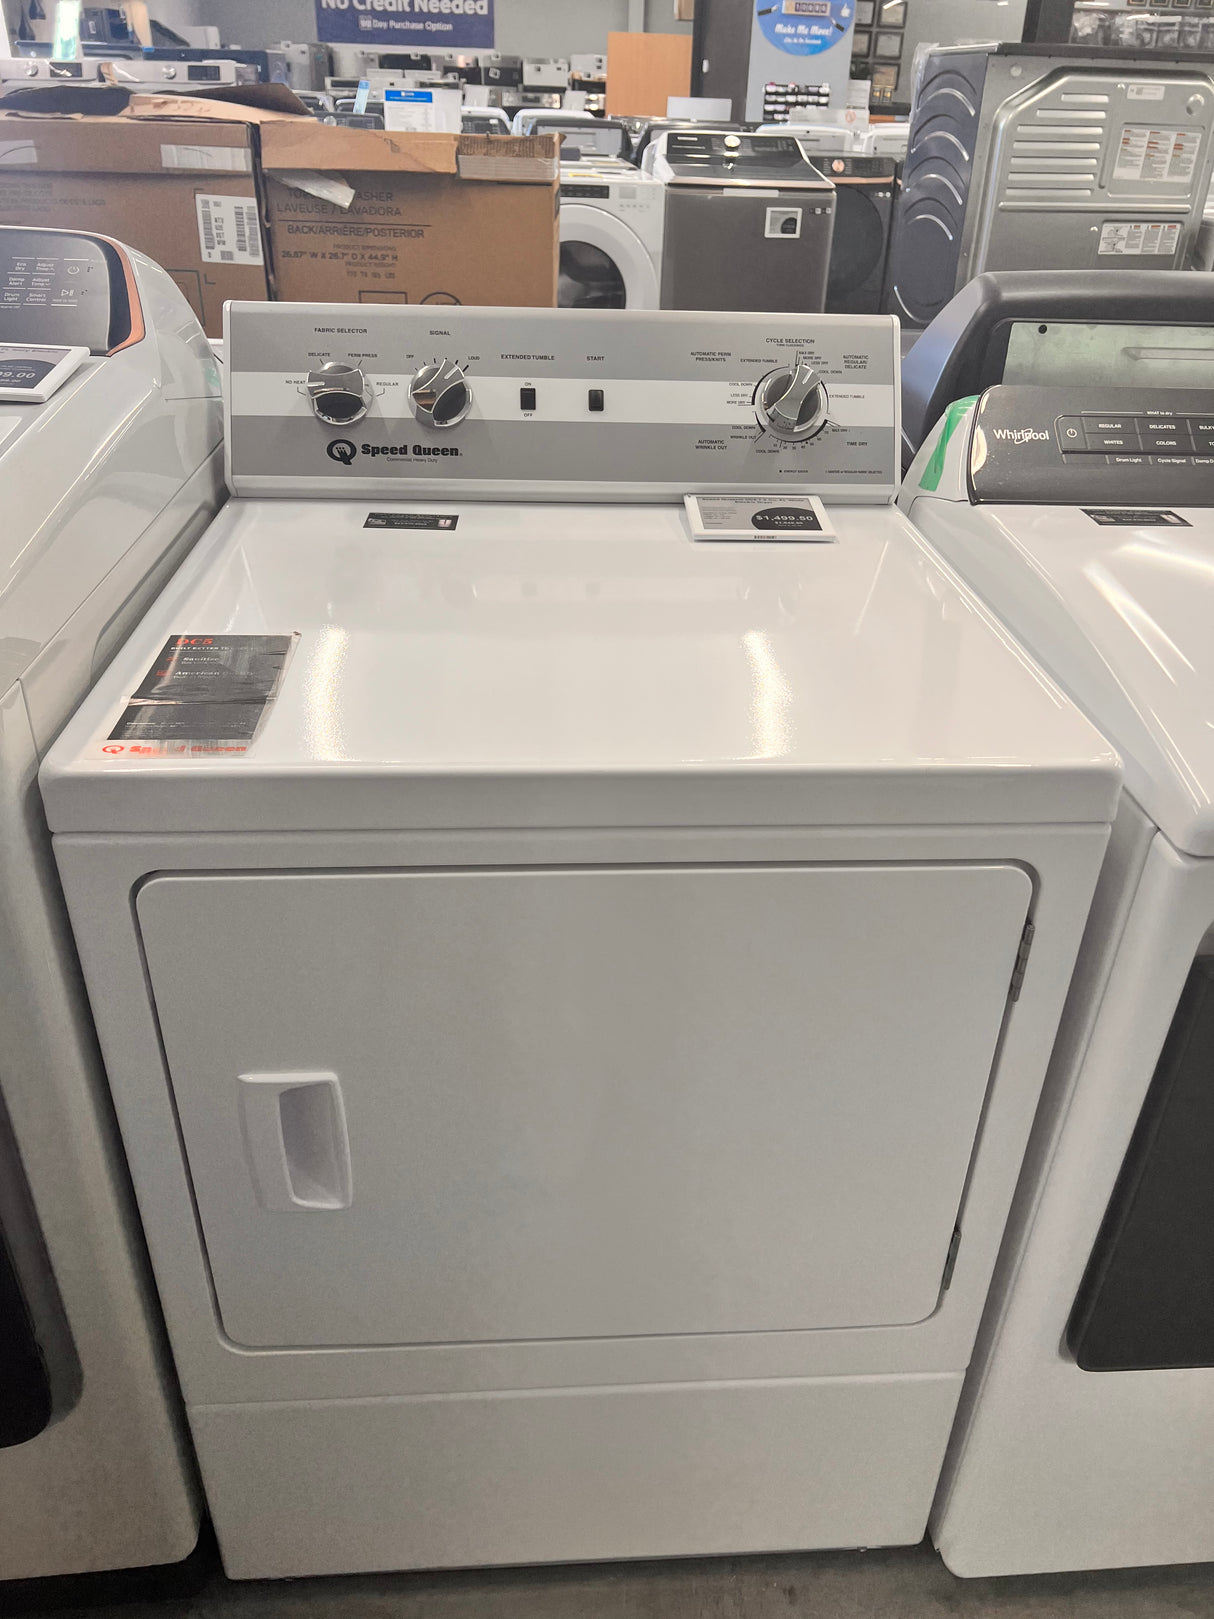 Speed queen DC5 7.0 ft.³ white electric dryer. DC5003WE.